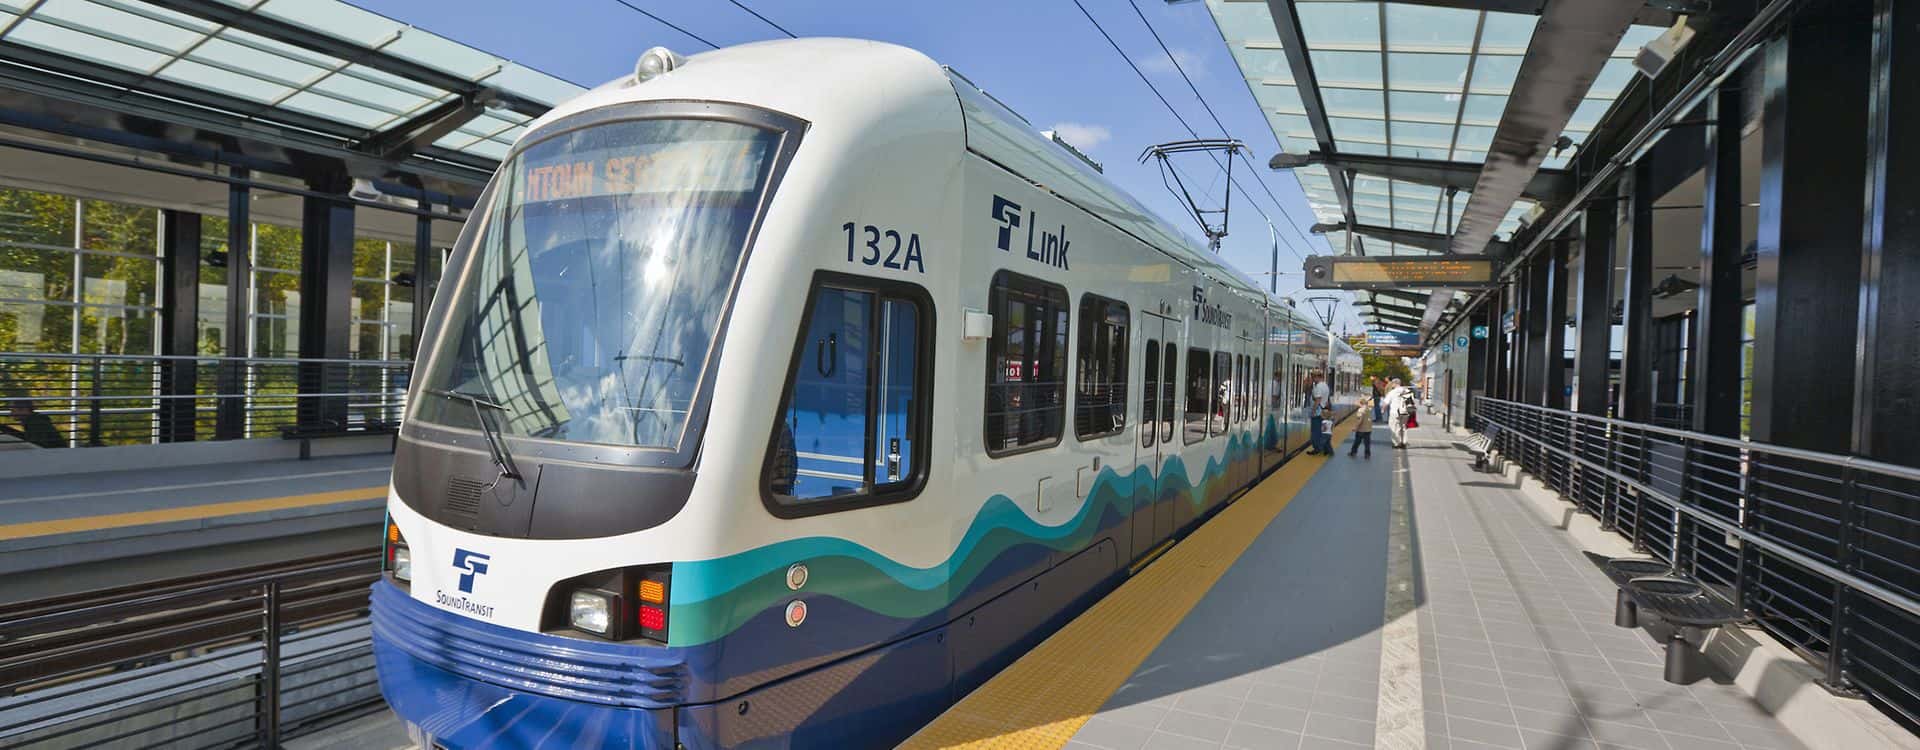 Seattle receives fed transit funding … Poll backs Pacific NW high-speed ...